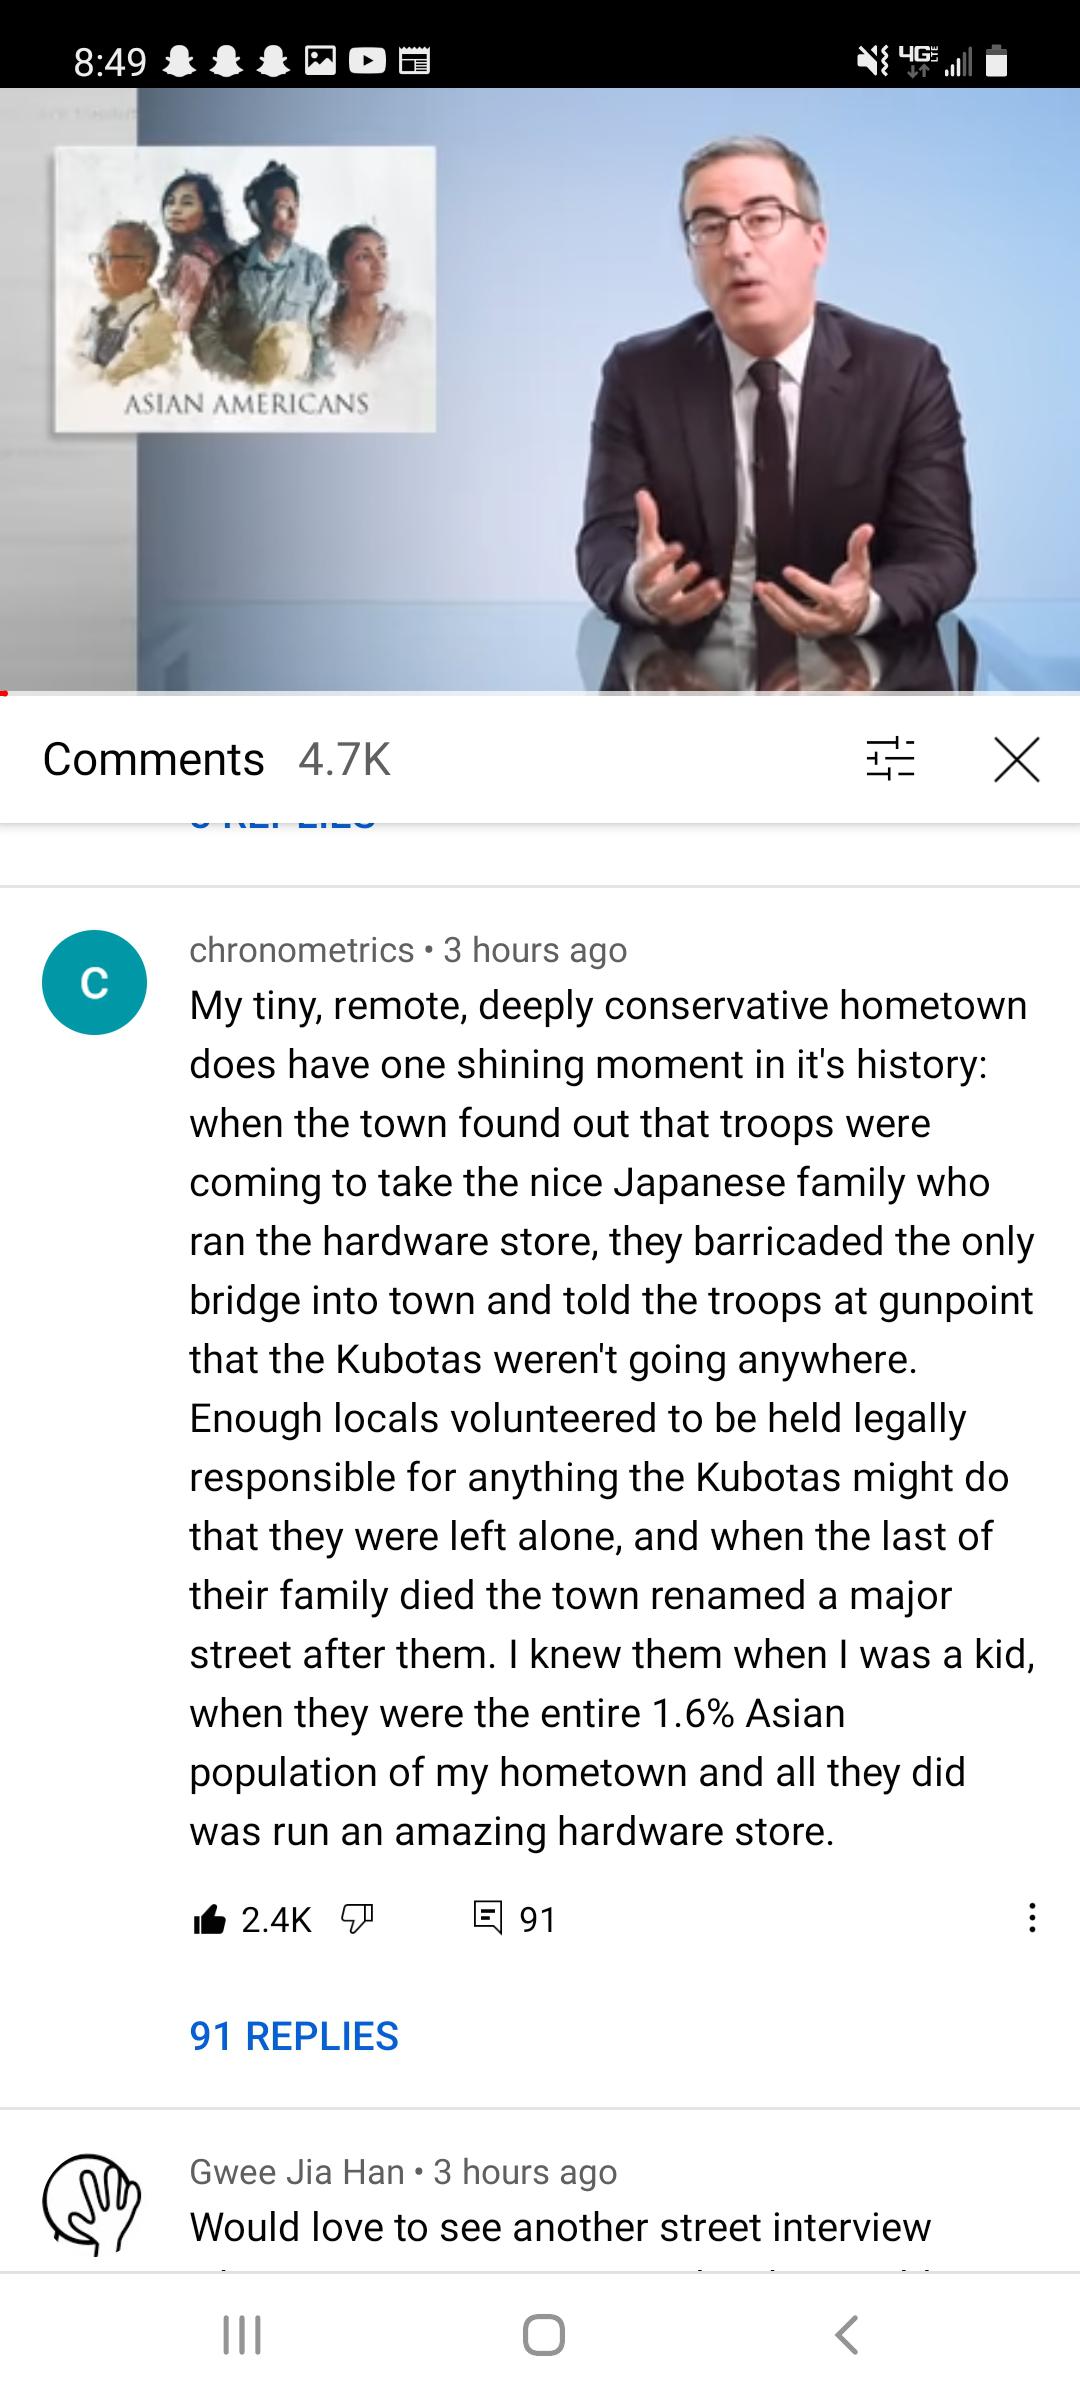 wholesome-posts media - 4G Asian Americans thi C chronometrics. 3 hours ago My tiny, remote, deeply conservative hometown does have one shining moment in it's history when the town found out that troops were coming to take the nice Japanese family who ran